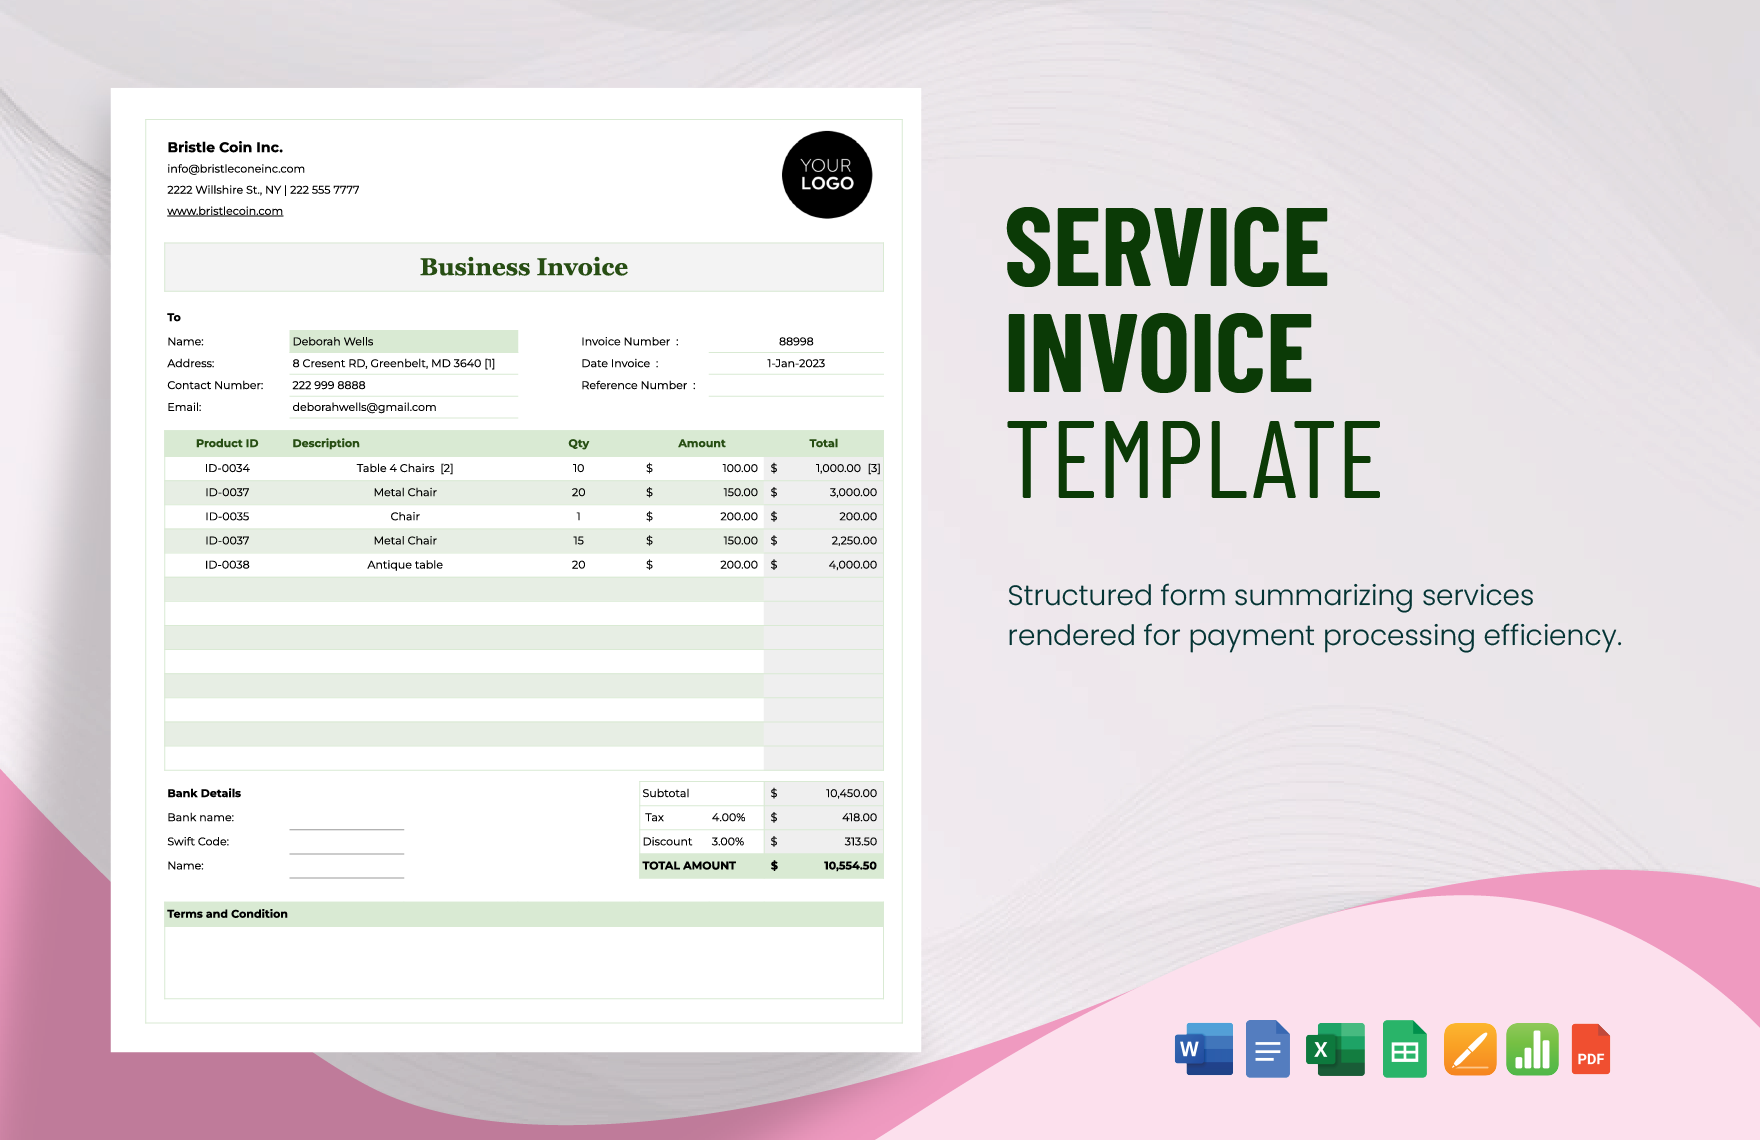 Business Invoice Template in Word, Google Docs, Excel, PDF, Google Sheets, PSD, Apple Pages, Apple Numbers